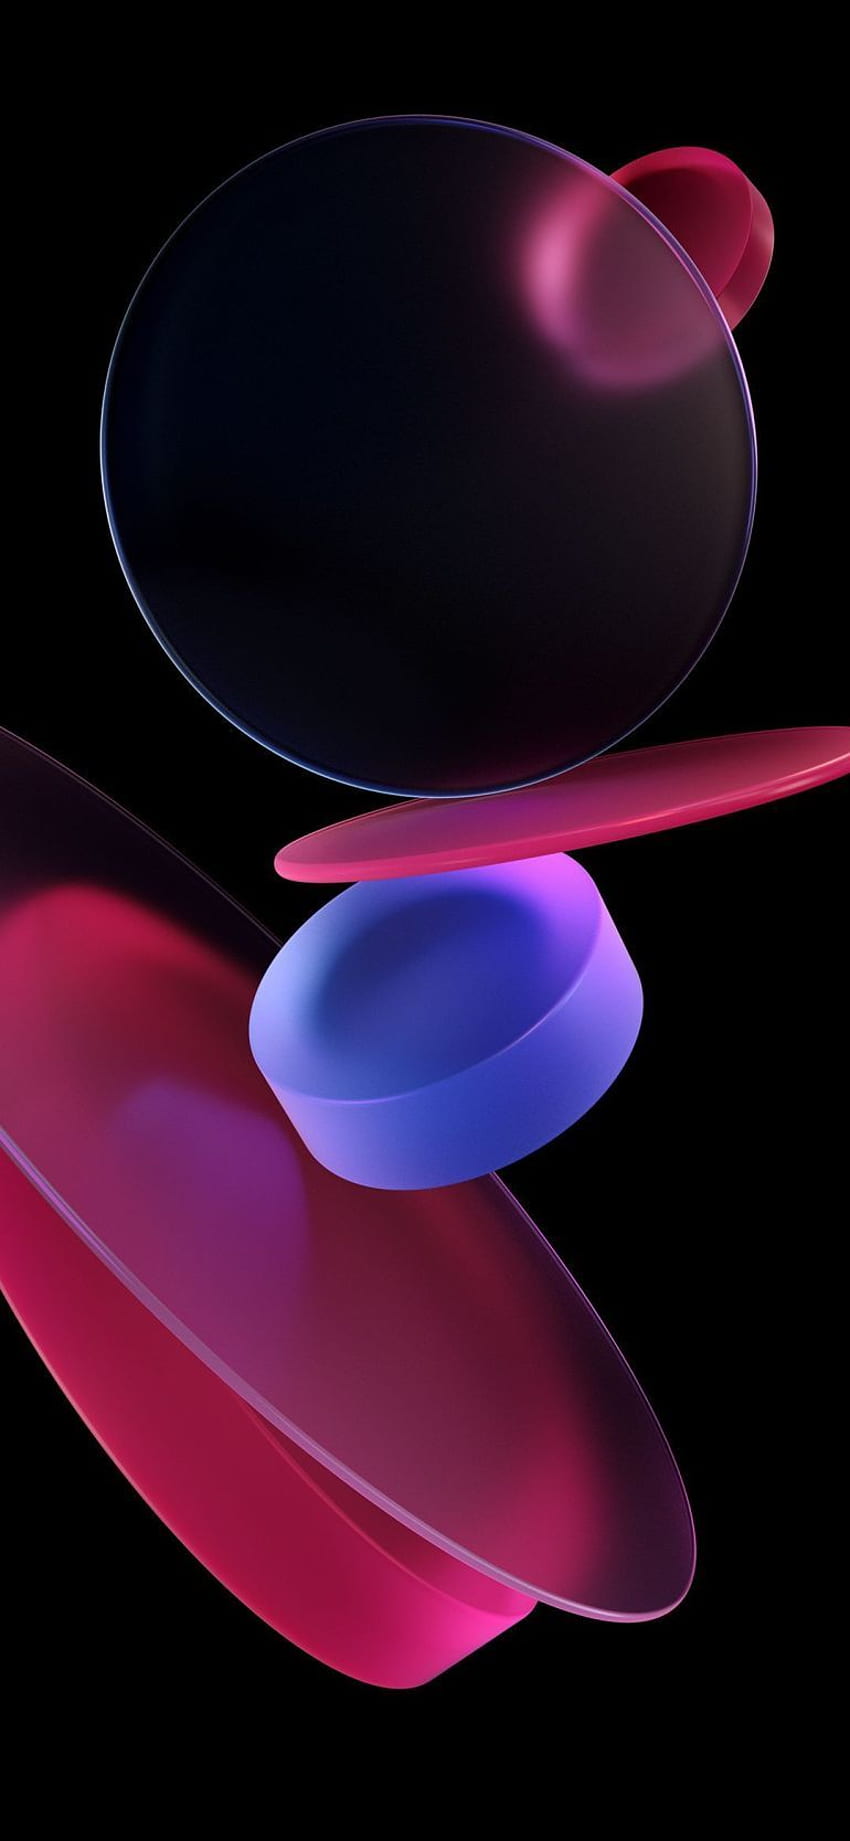 Best Aesthetic for iOS 14: Black, White, Gold, Neon, Red, Blue, Pink, Orange, Green, Purple, and More HD phone wallpaper